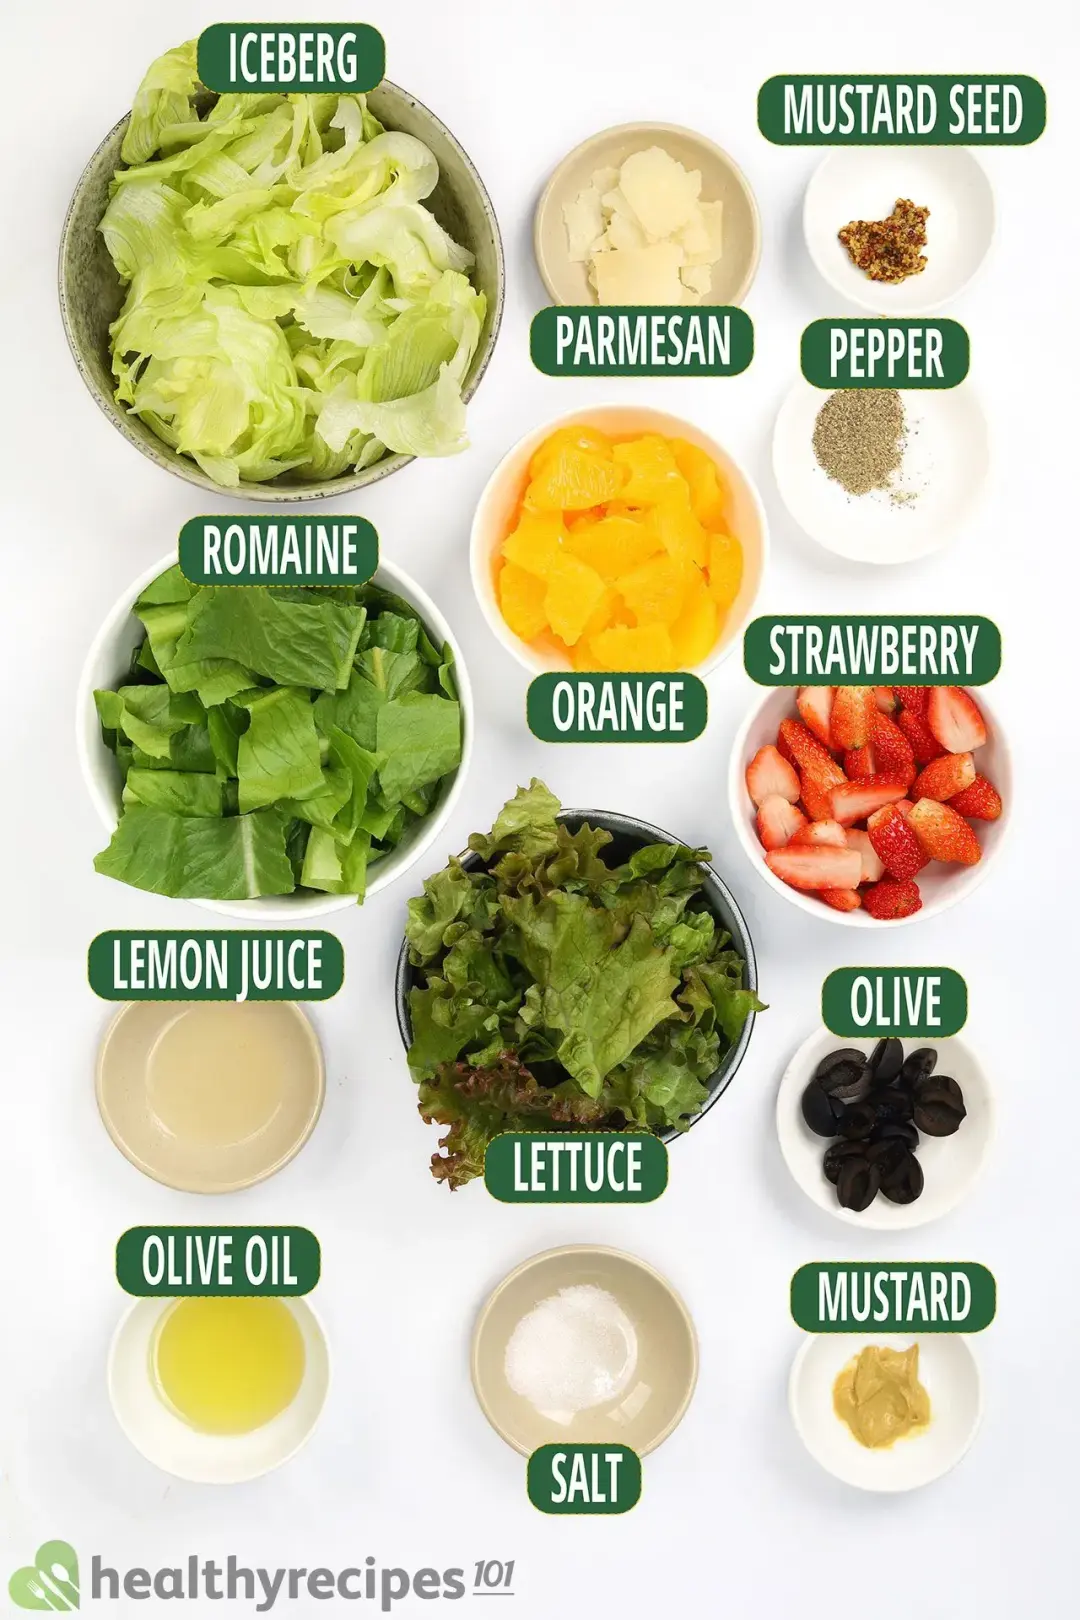 Ingredients for Mixed Greens Salad